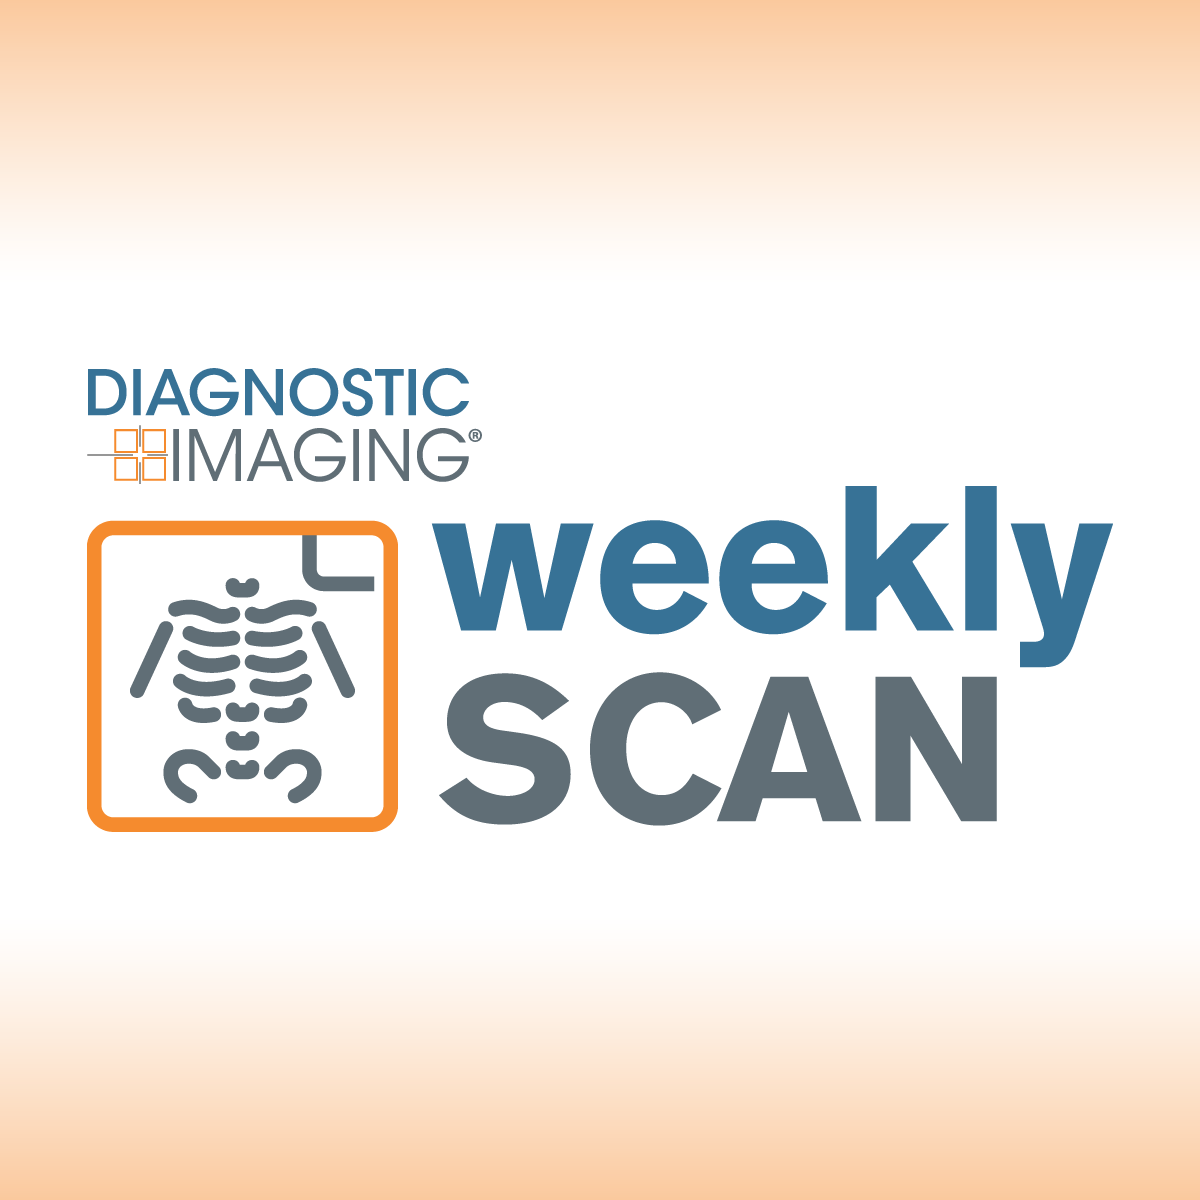 Diagnostic Imaging's Weekly Scan: March 17-March 23